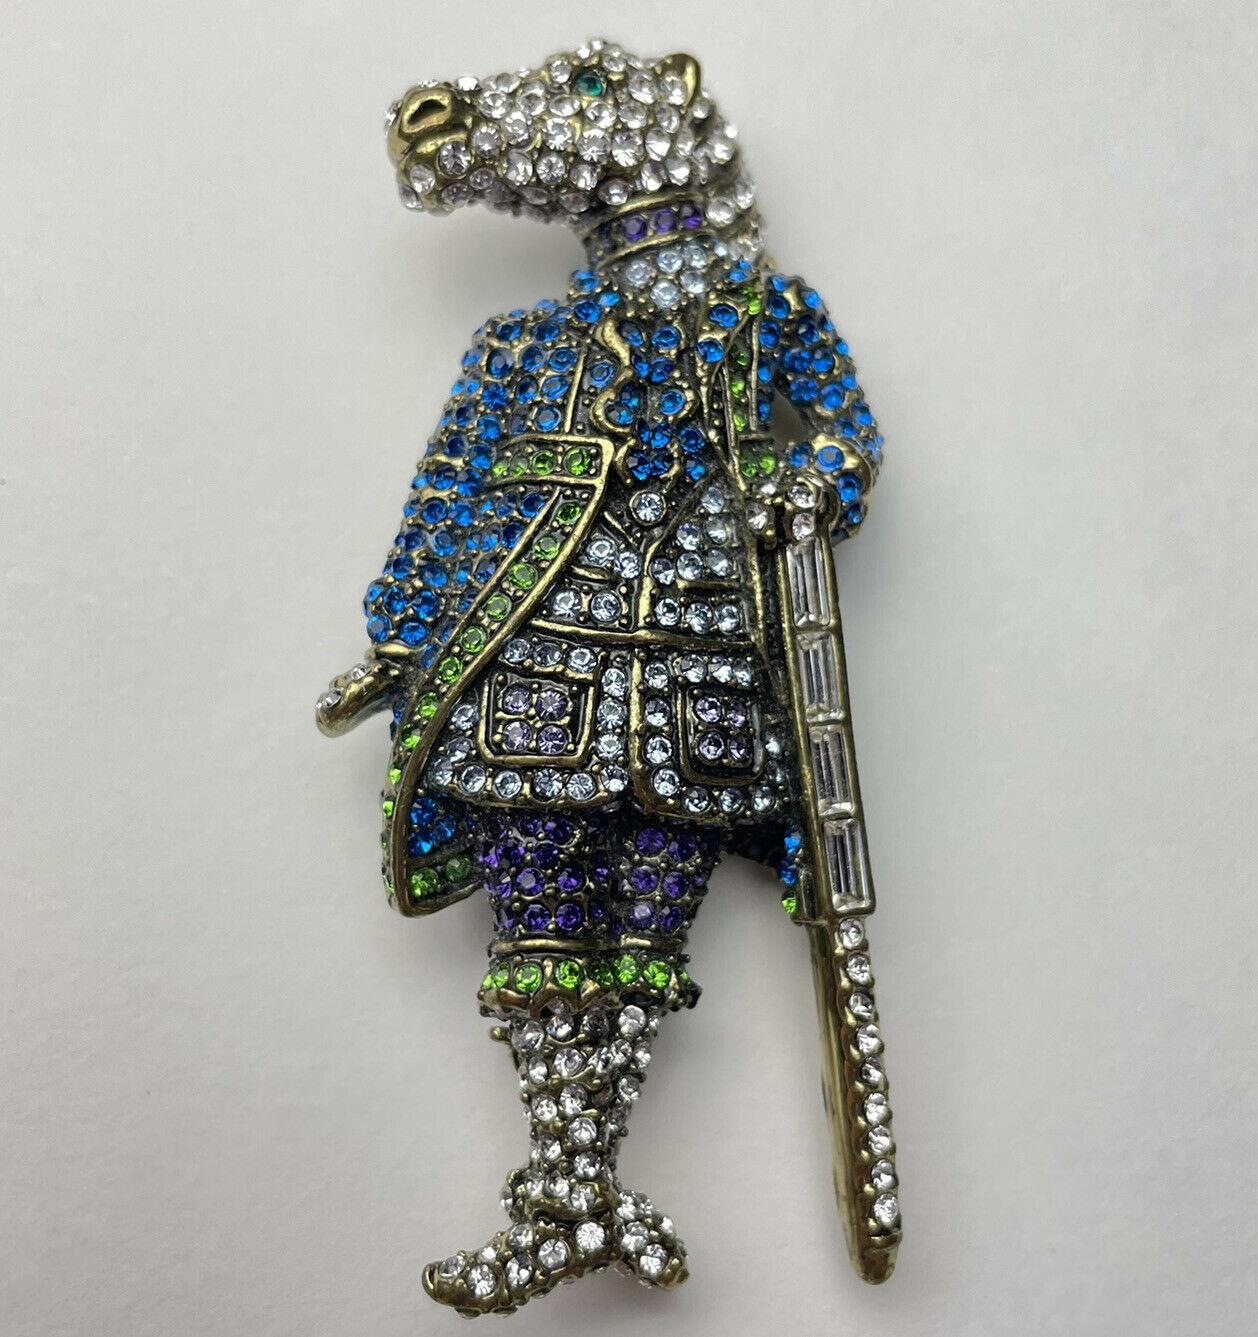 Simply Delightful! Beautiful Designer Signed Heidi Daus Equine Dandy Alice Through the Looking Glass Crystal Signed Brooch; encrusted with Multi-Color Sparking Crystals. For that Special Someone…Including you! 
